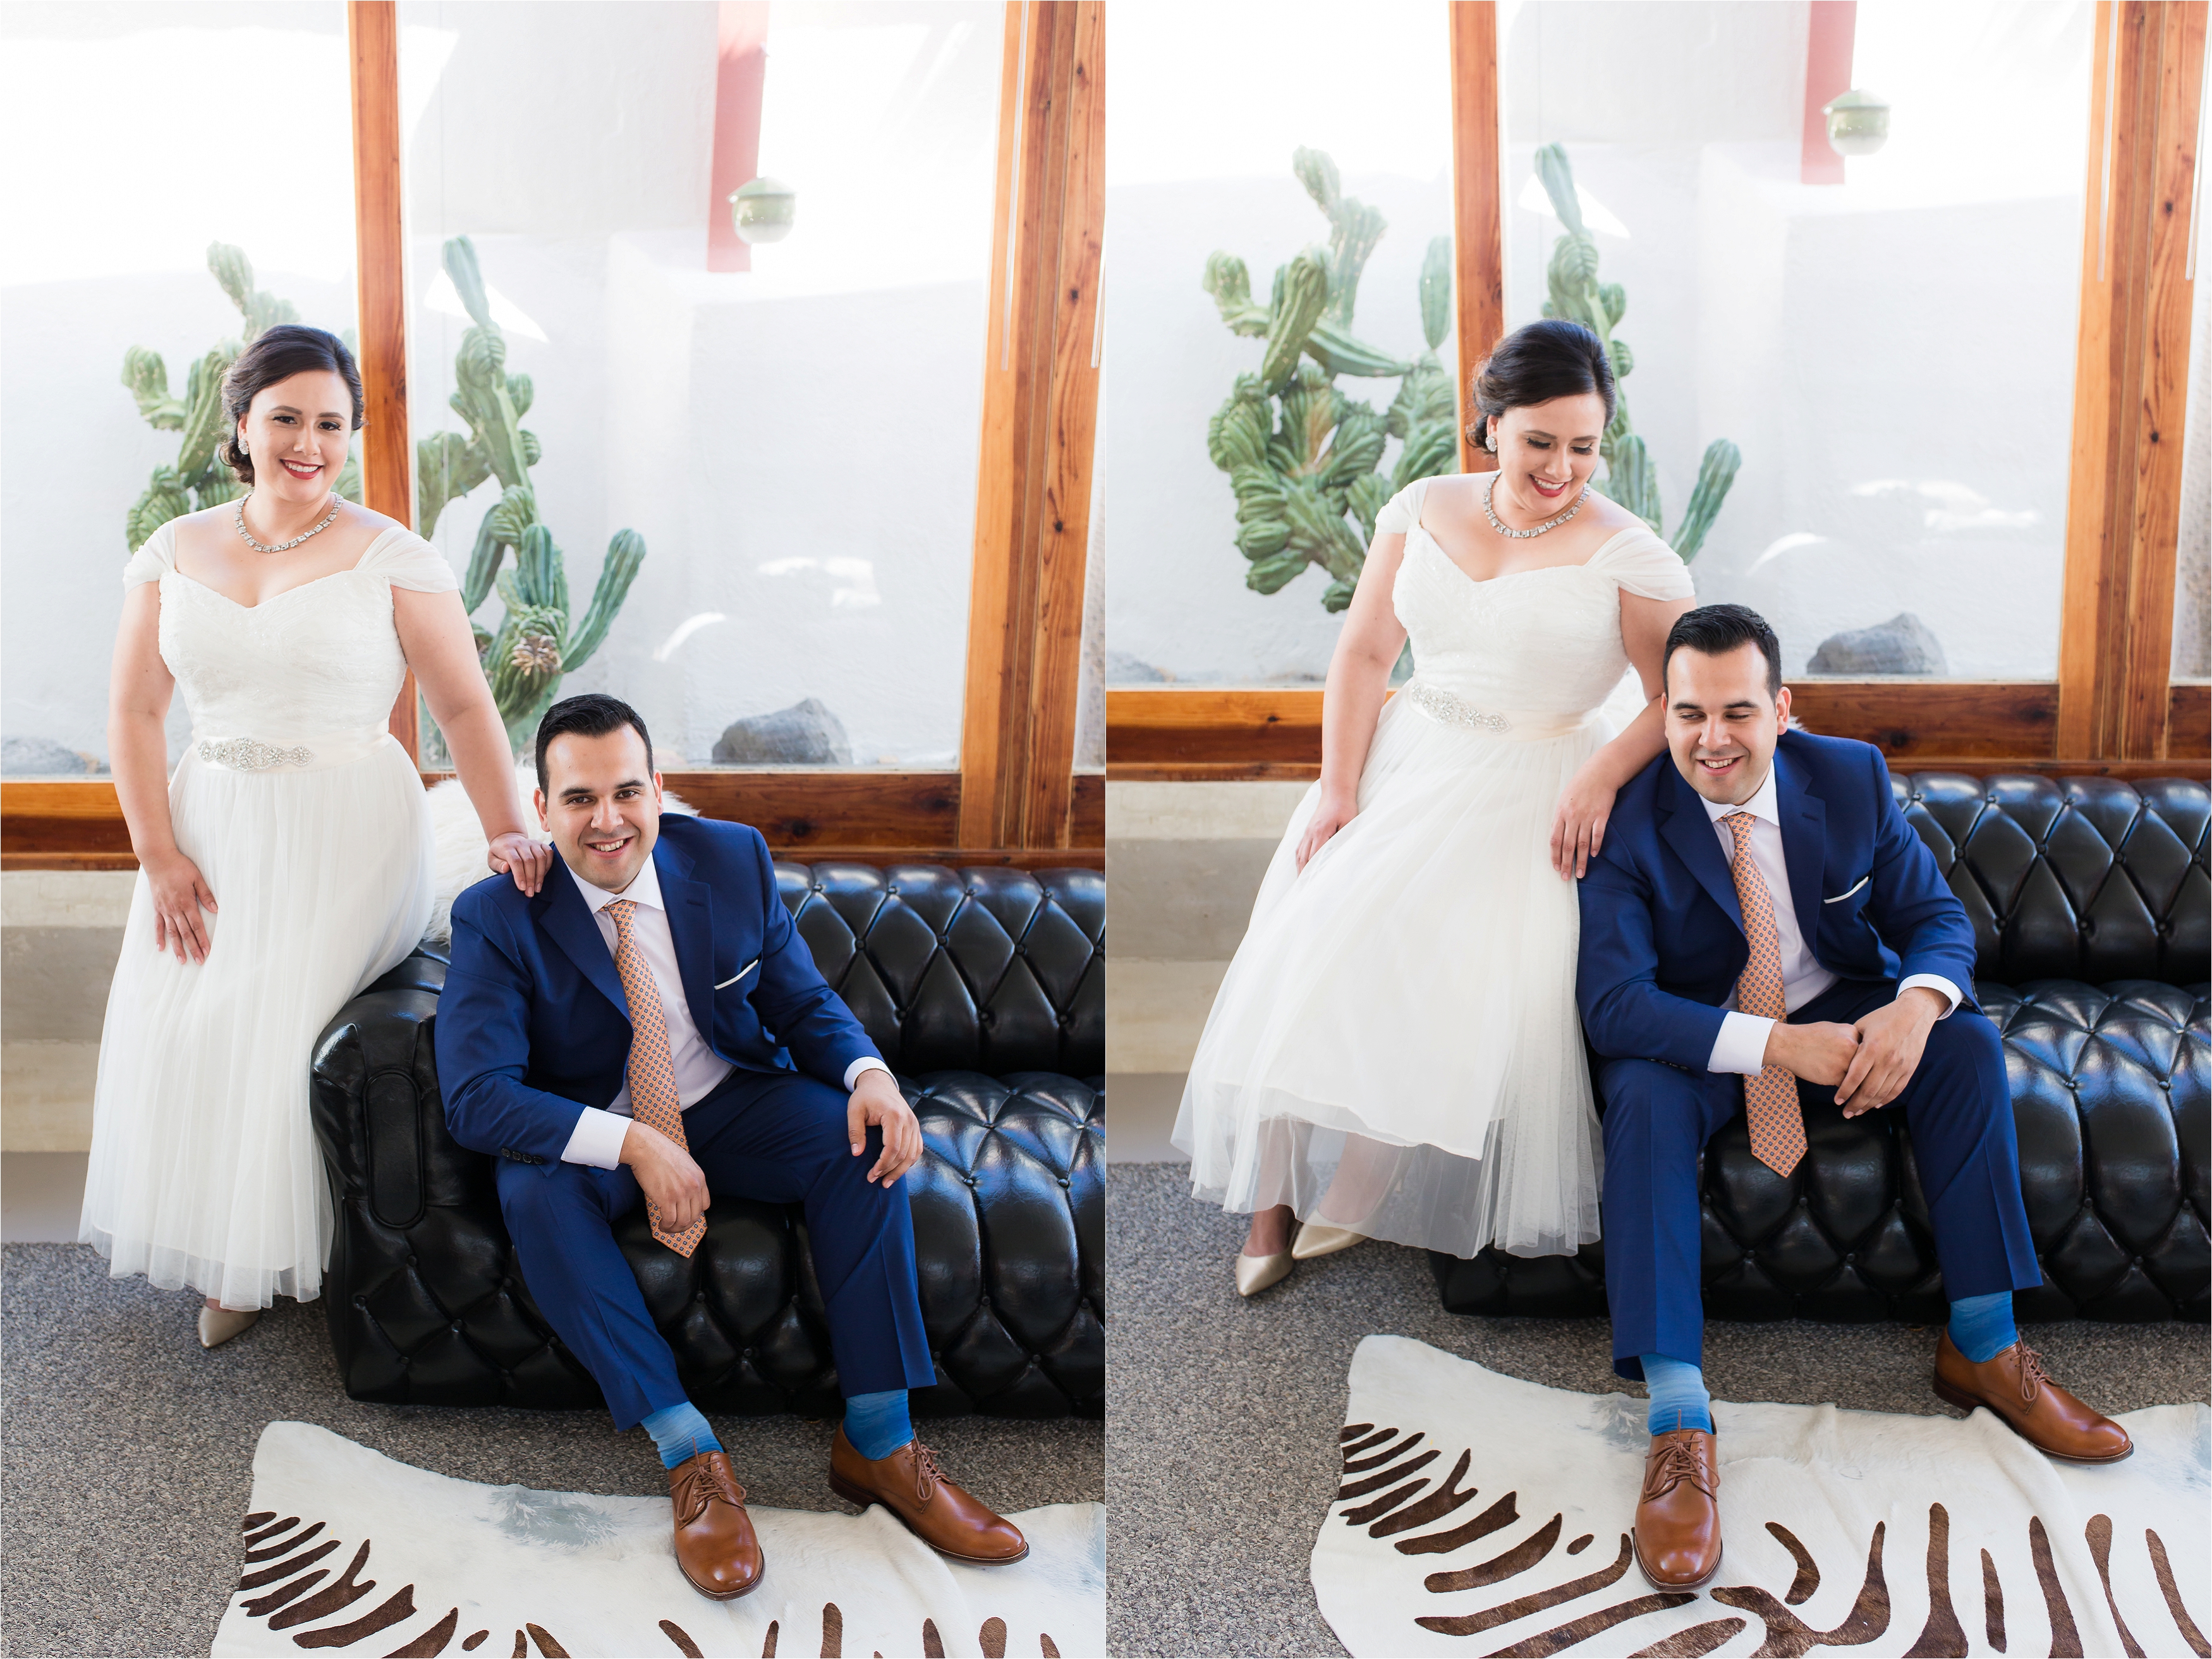 Bride and groom sitting on black leather couch smiling, photographed by Stefani Ciotti